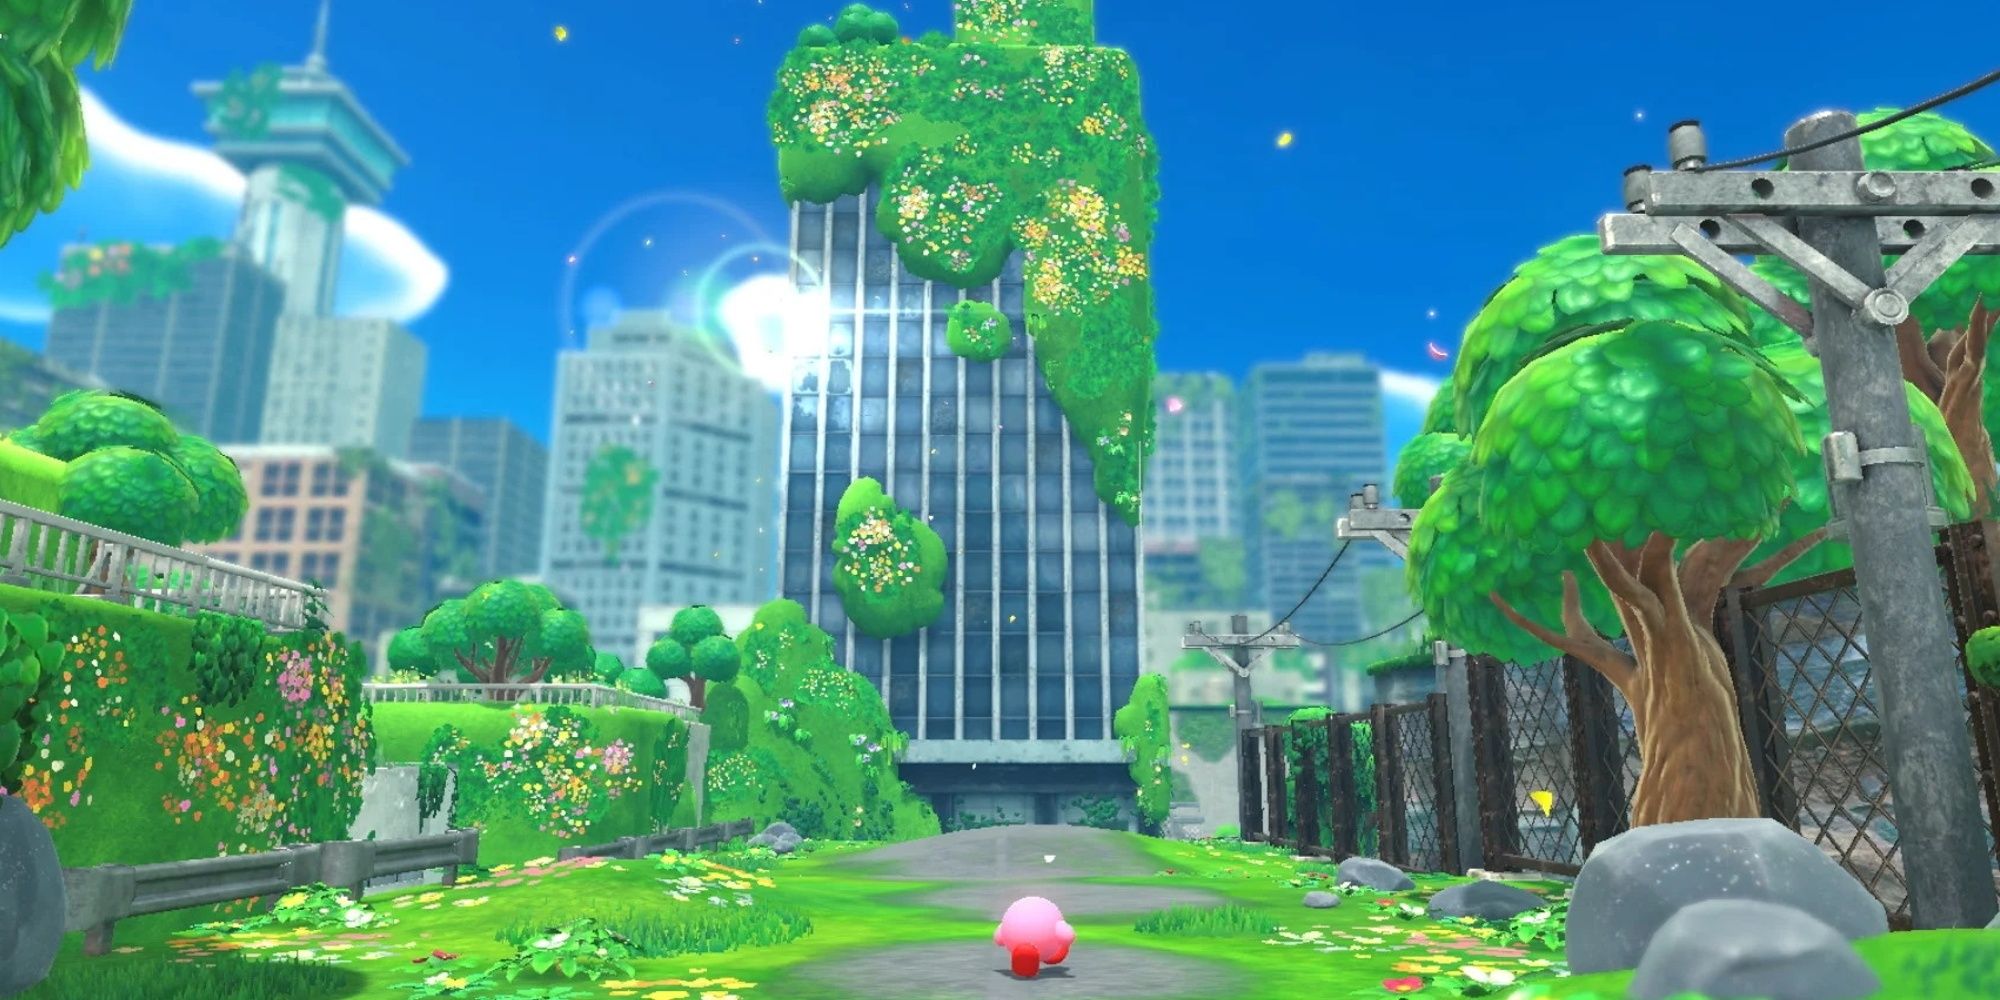 The opening level of Kirby and the Forgotten Land